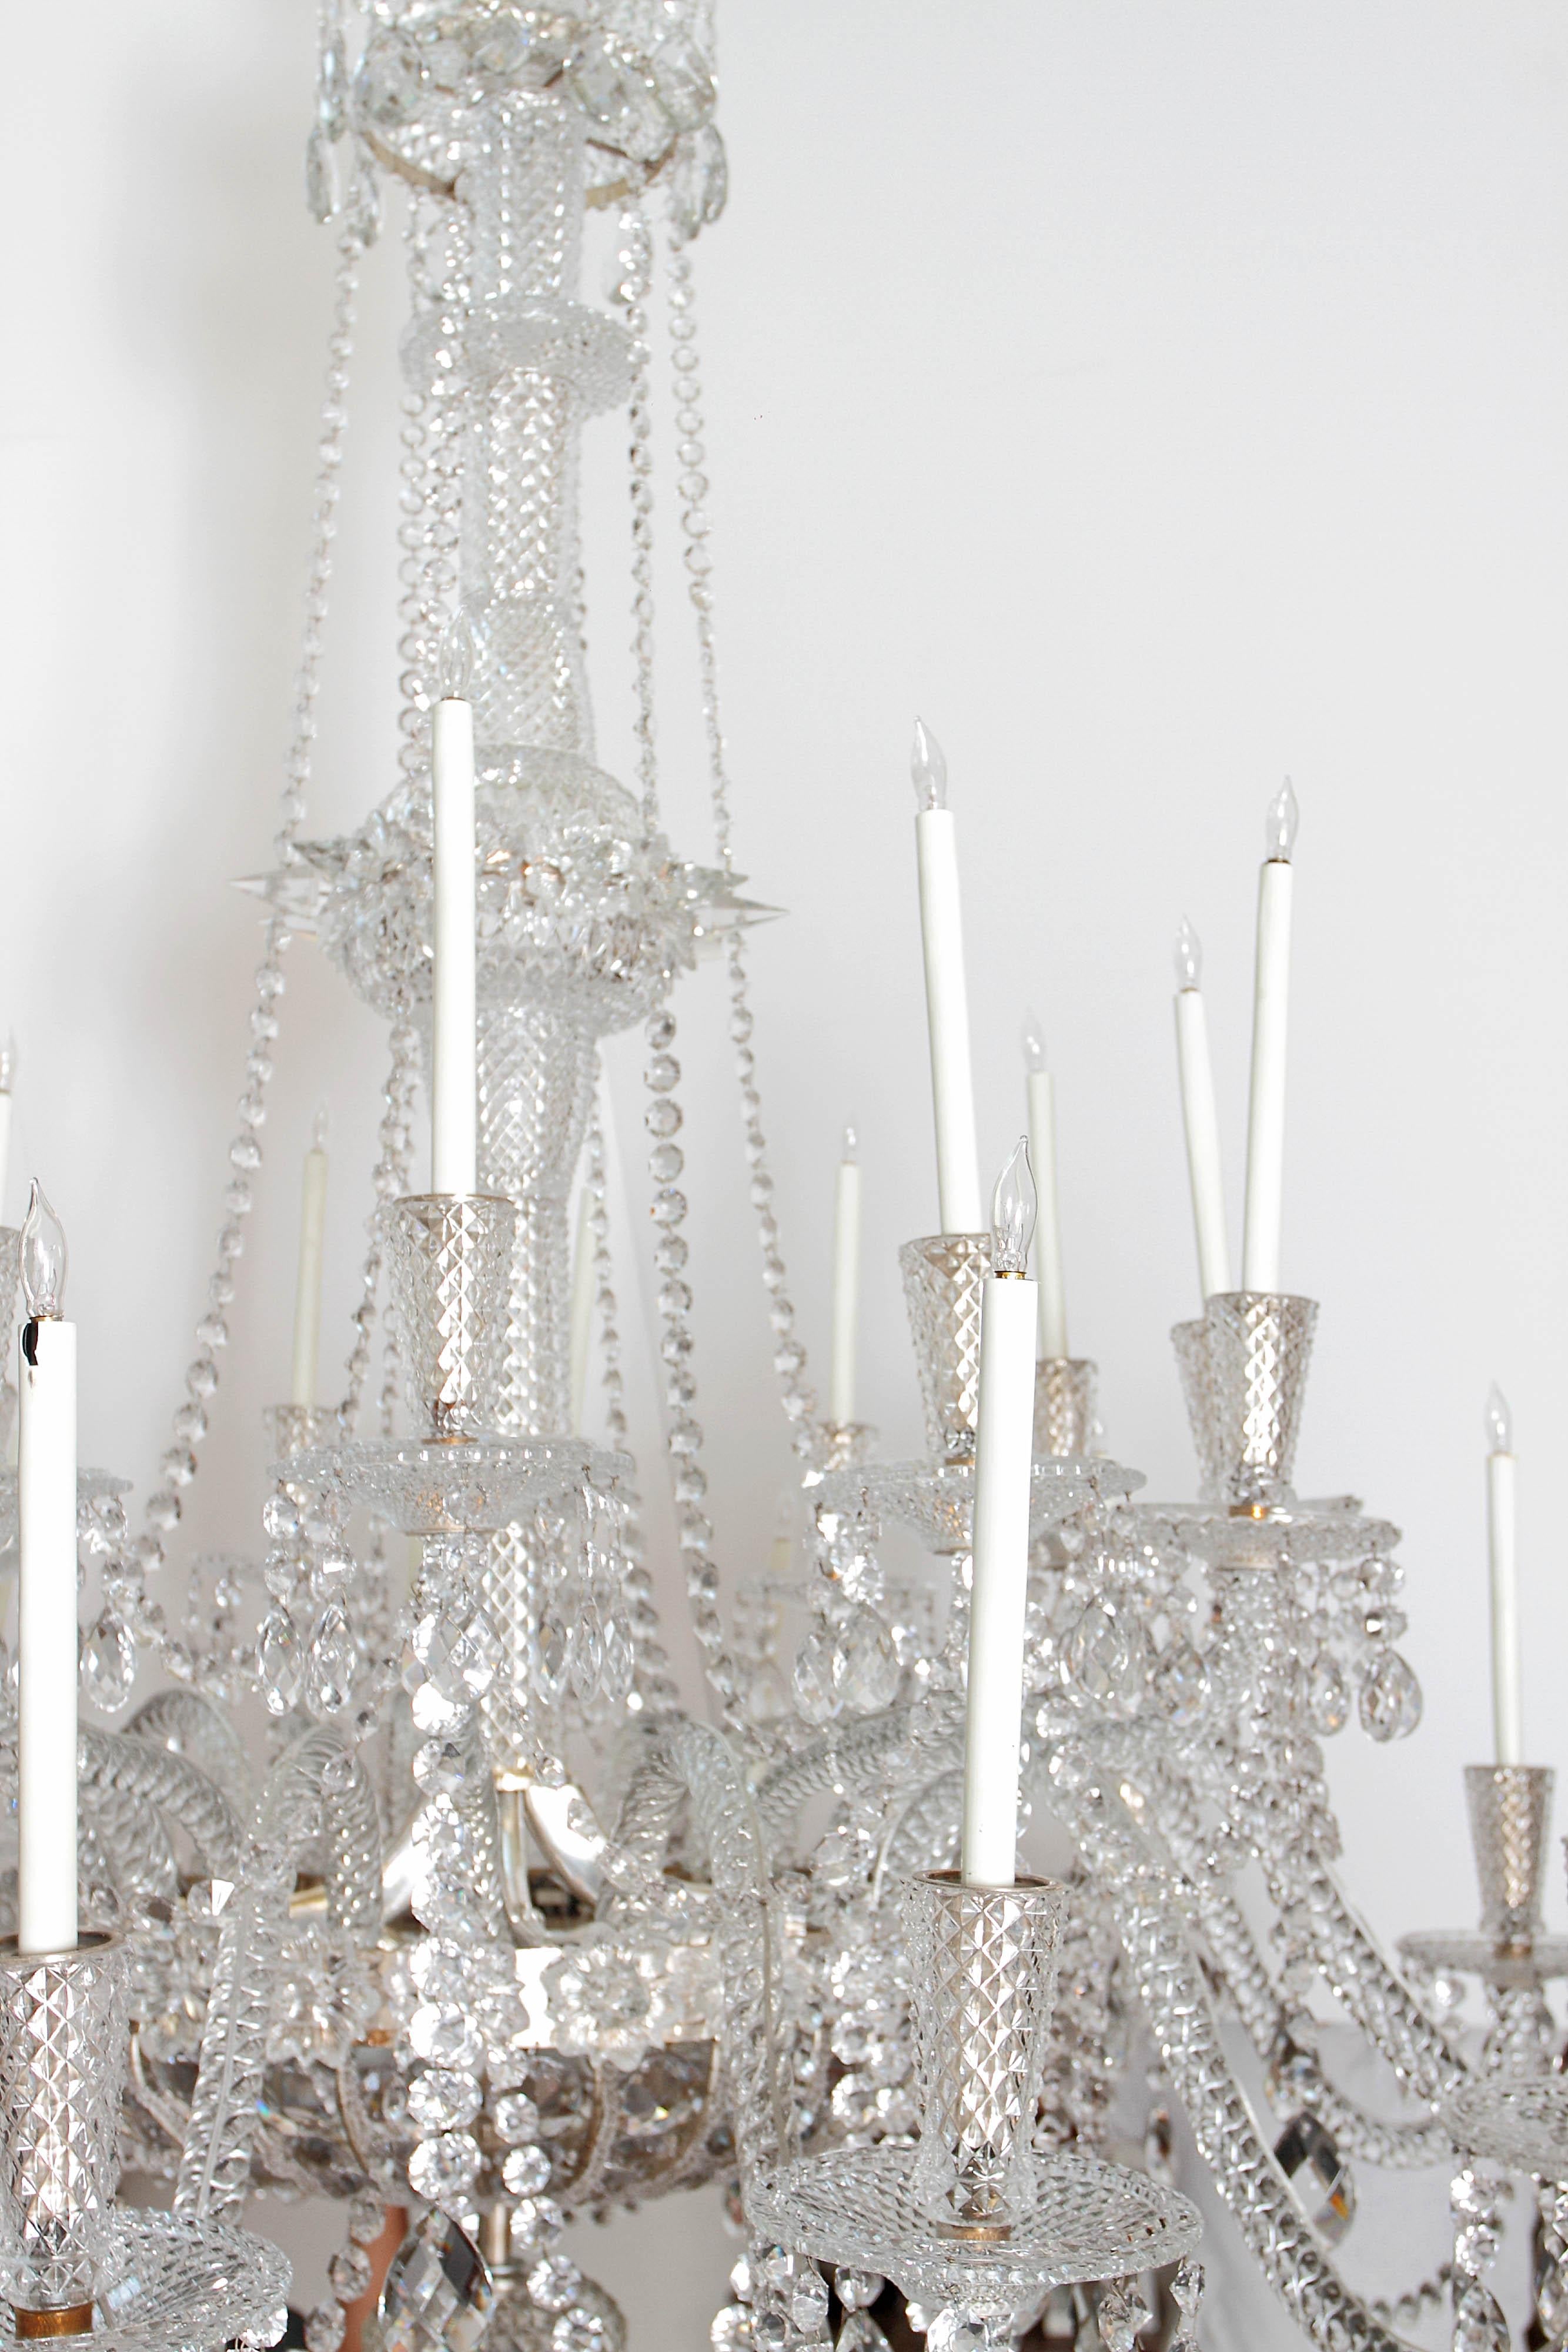 Pair of Grand Scale Mid-Victorian 24-Light Cut-Crystal Chandeliers In Good Condition For Sale In Dallas, TX